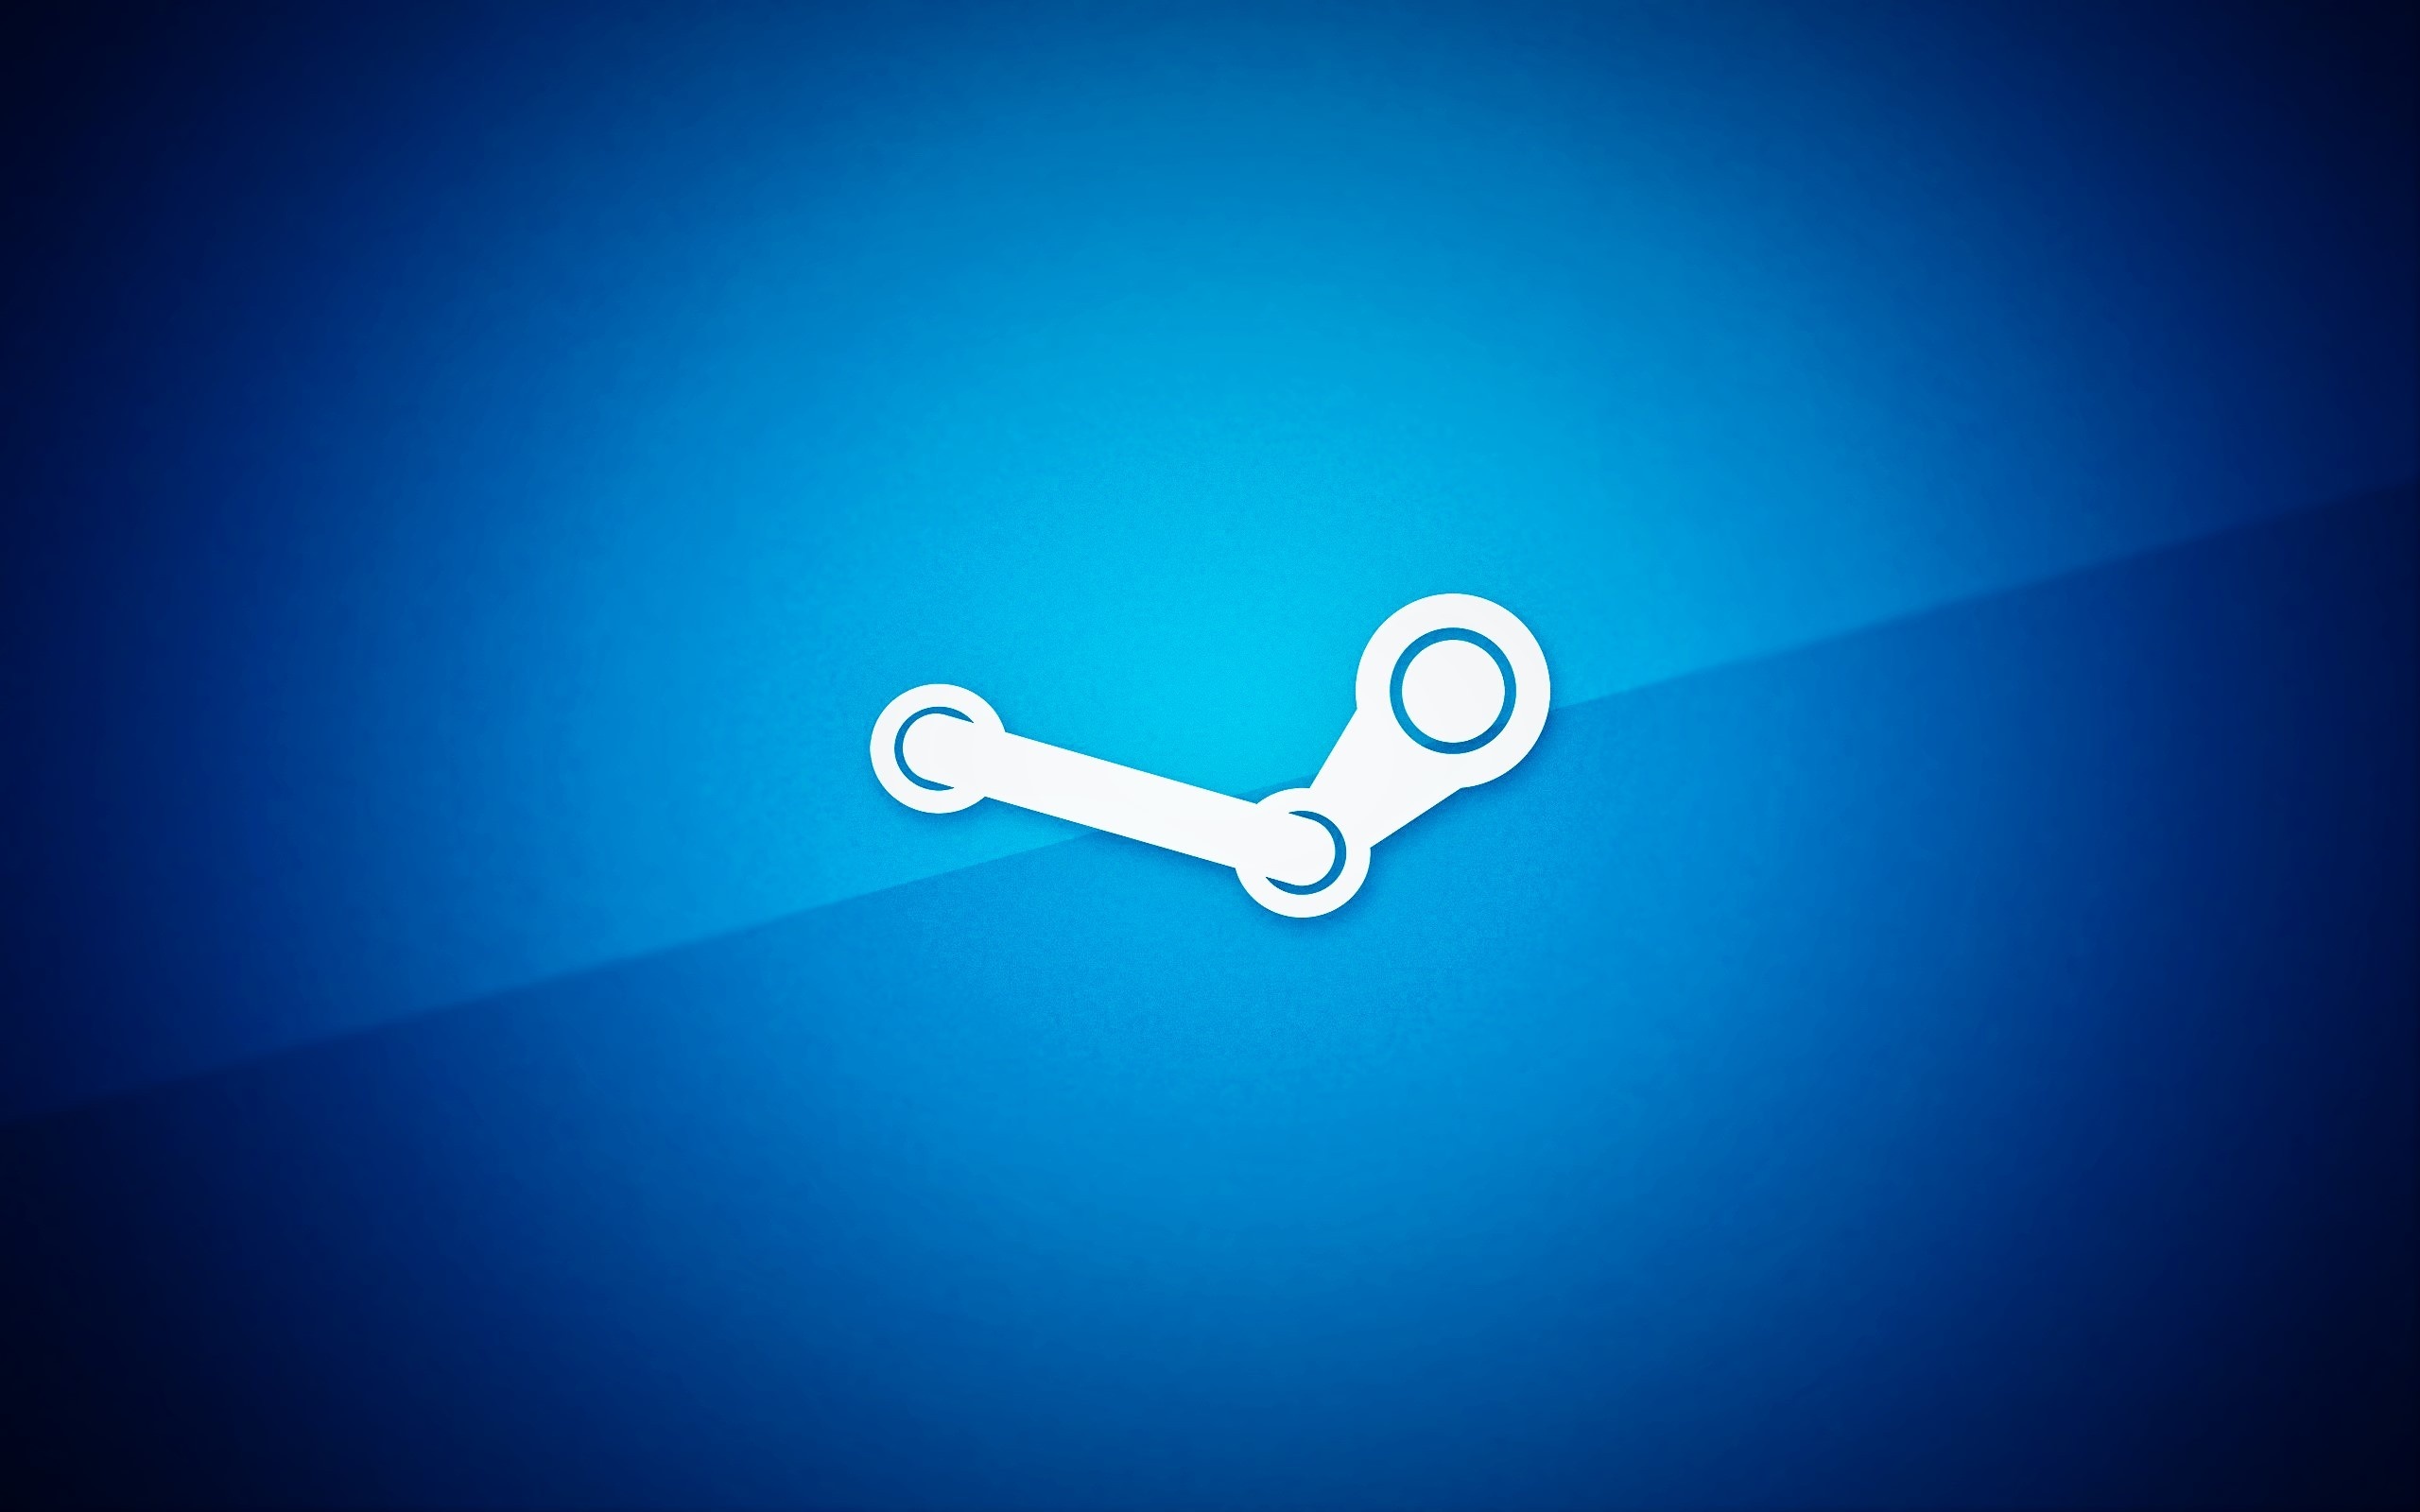 Steam: One of the most popular platforms in its field, Gaming. 2560x1600 HD Wallpaper.